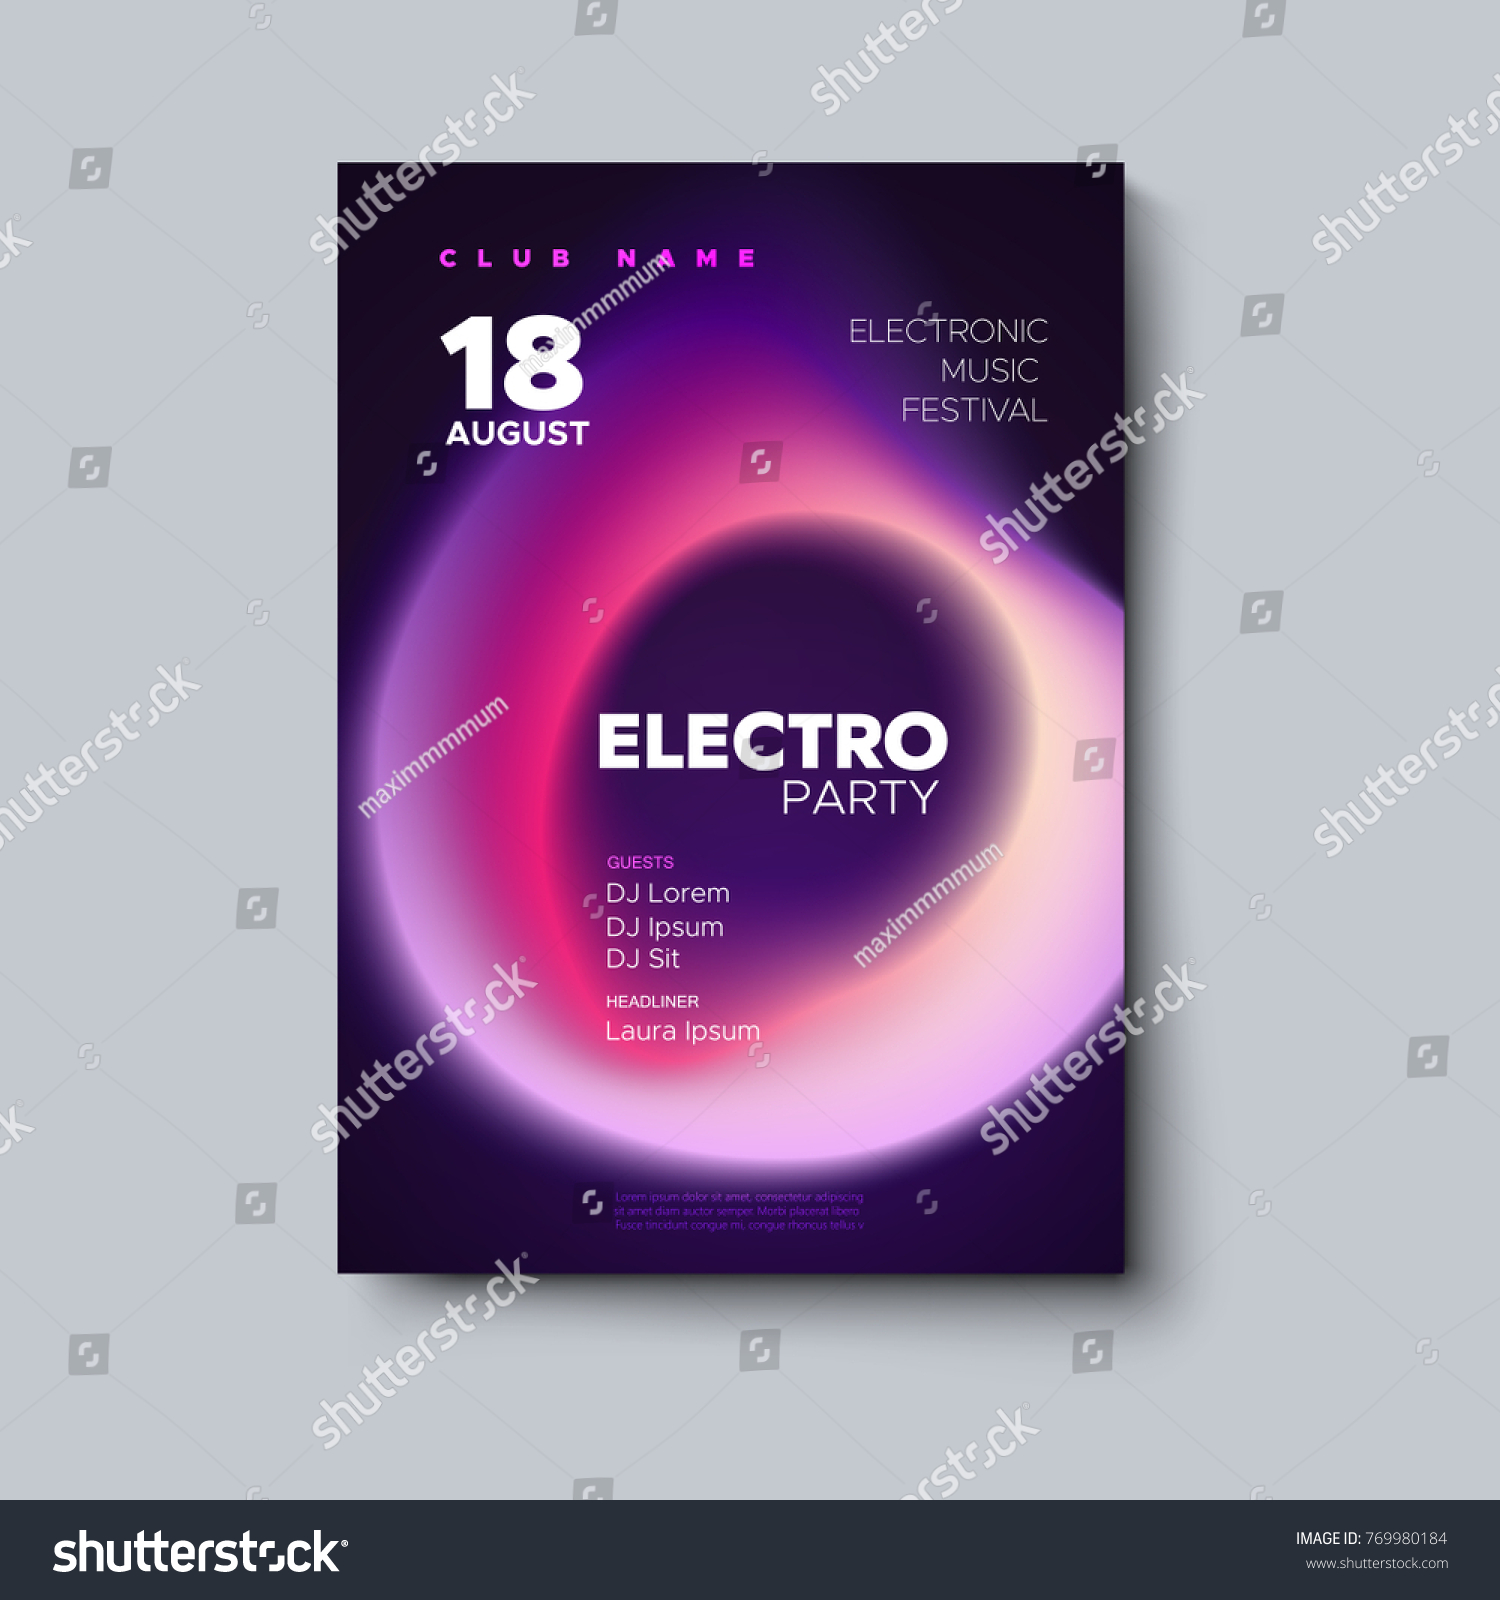 Download Electronic Music Festival Poster Mockup Electro Stock Vector Royalty Free 769980184